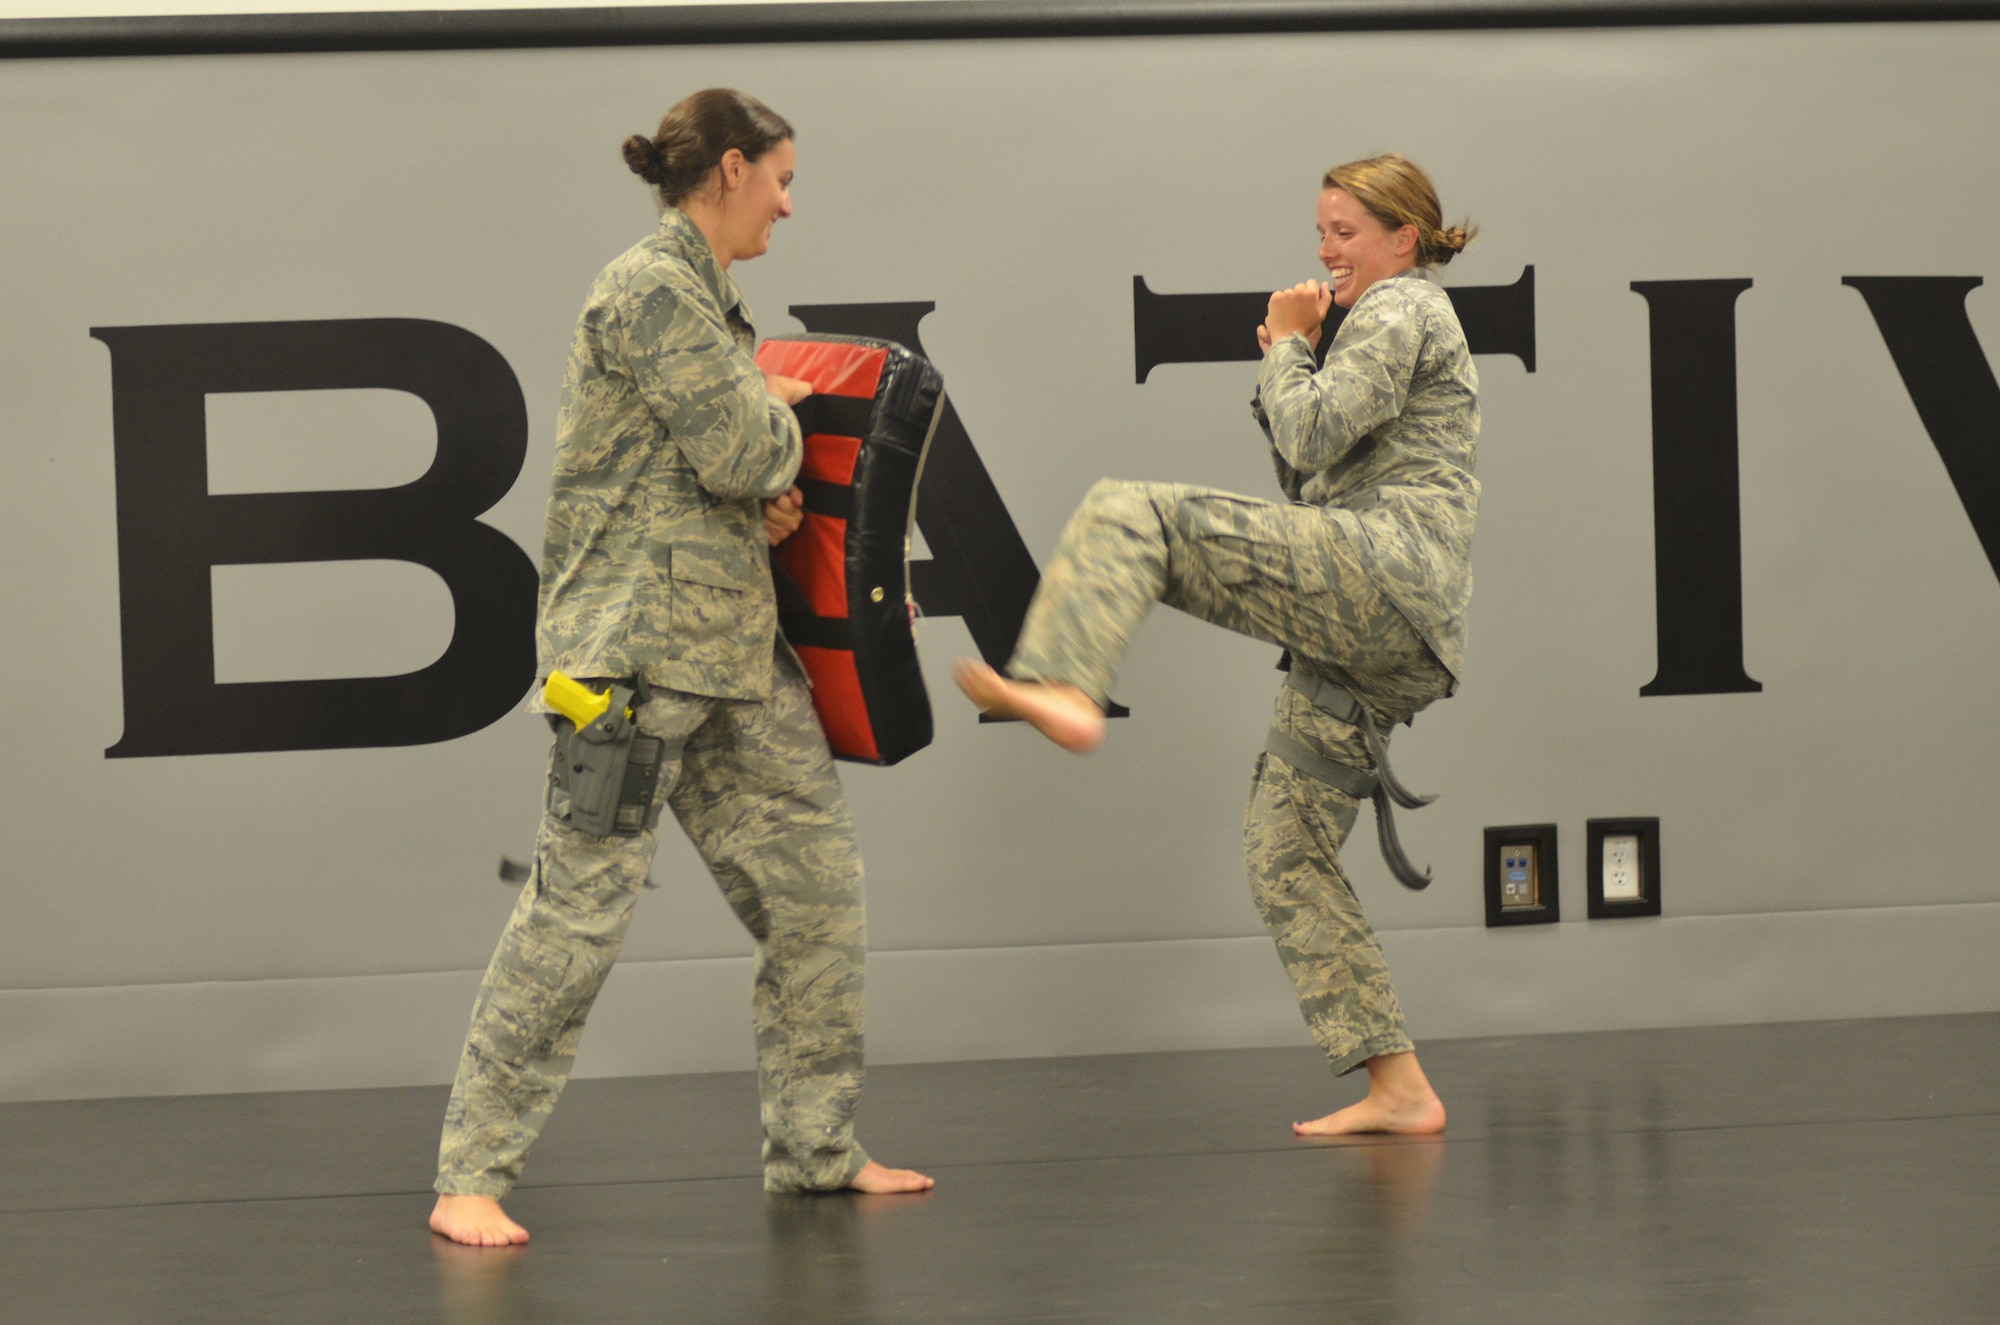 Academy cadets Sydney Rower (left) and Abby Wolters spar during a Combative Class here Sept. 19. The three-part course is a graduation requirement for cadets. (U.S. Air Force photo/Amber Baillie)